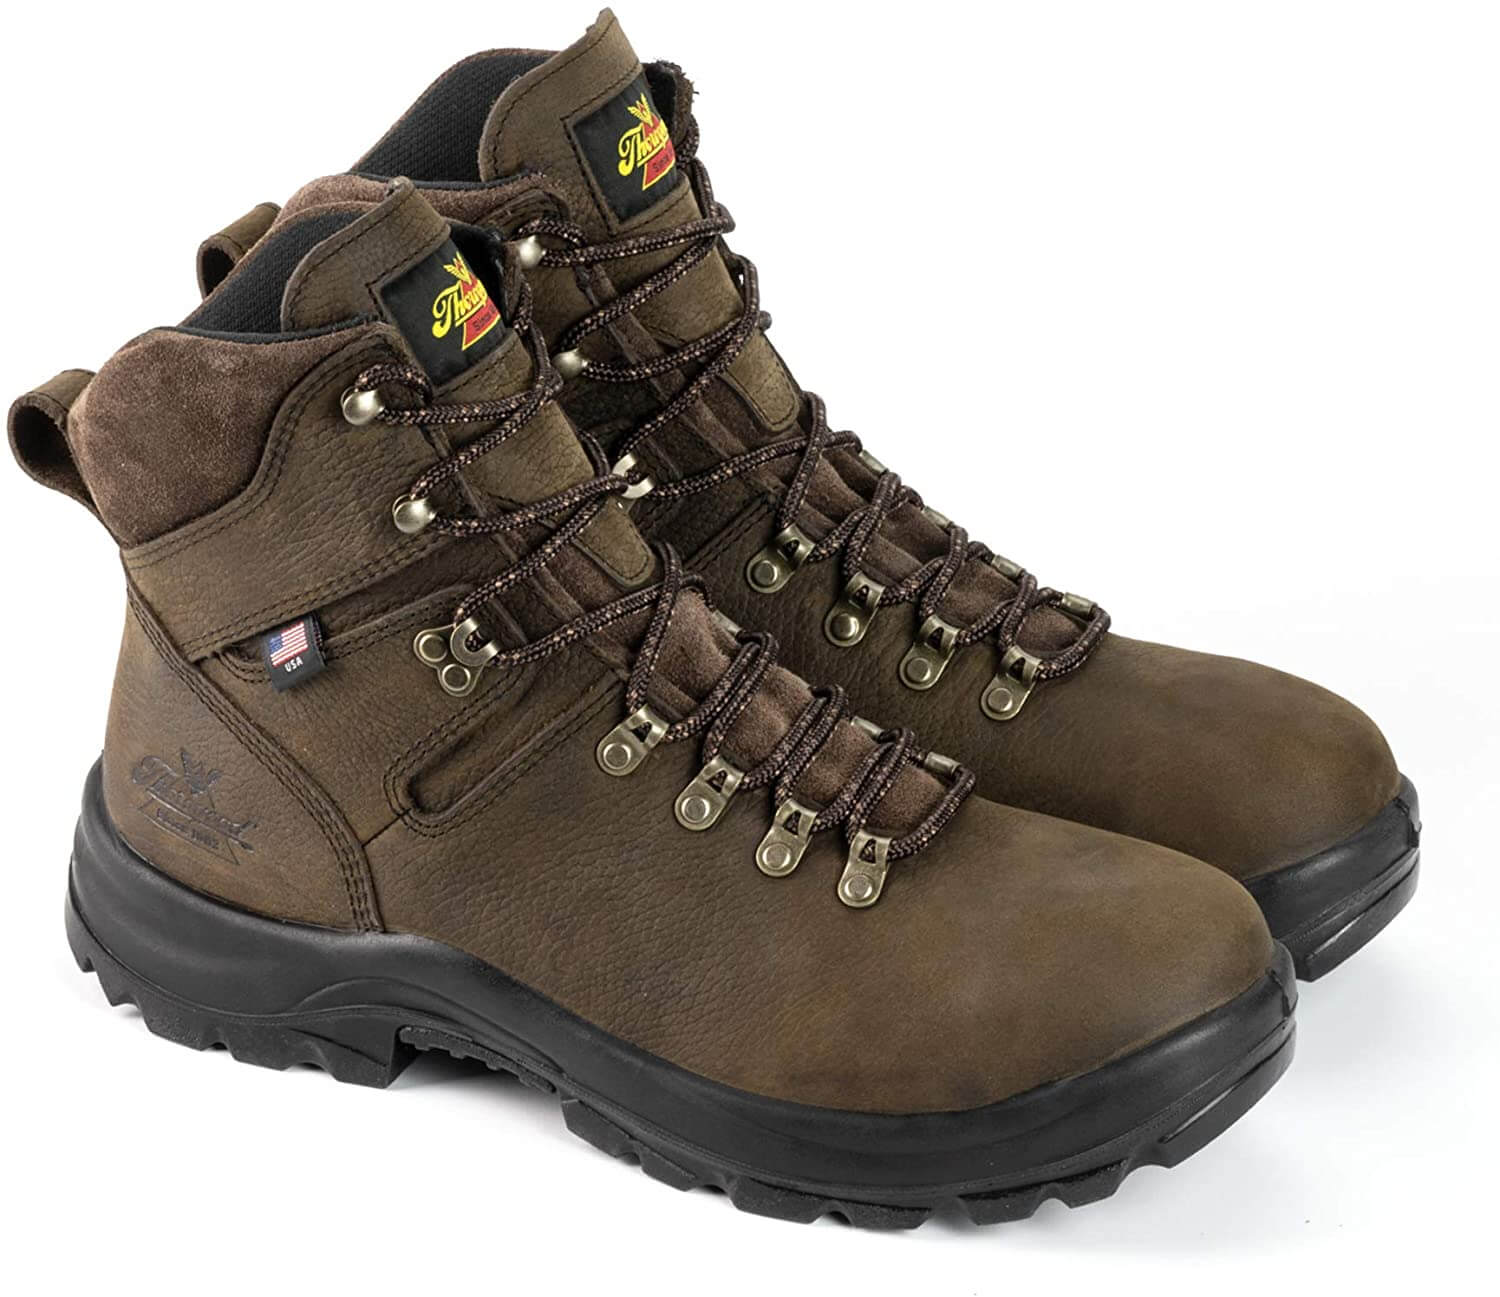 American Union Series Safety Toe electrician work boots